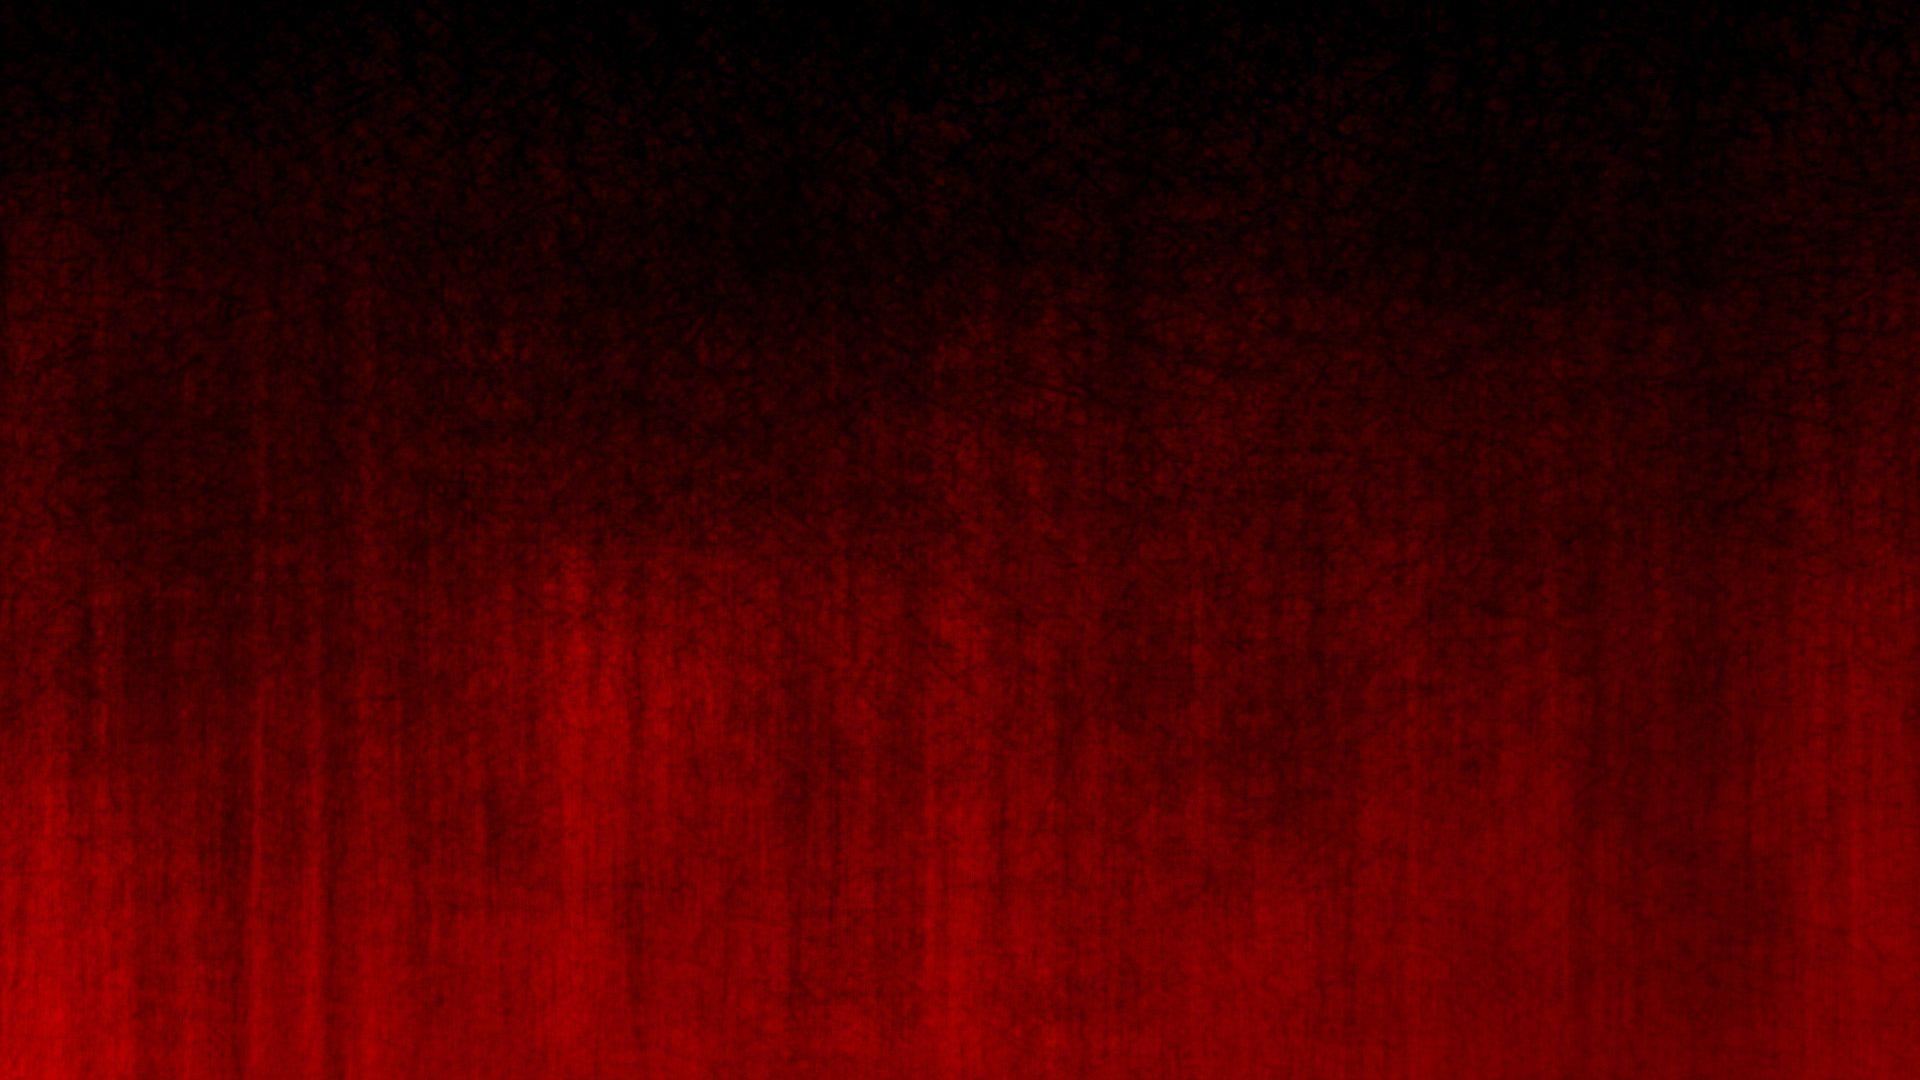 Red Grunge Backgrounds Wallpaper Cave